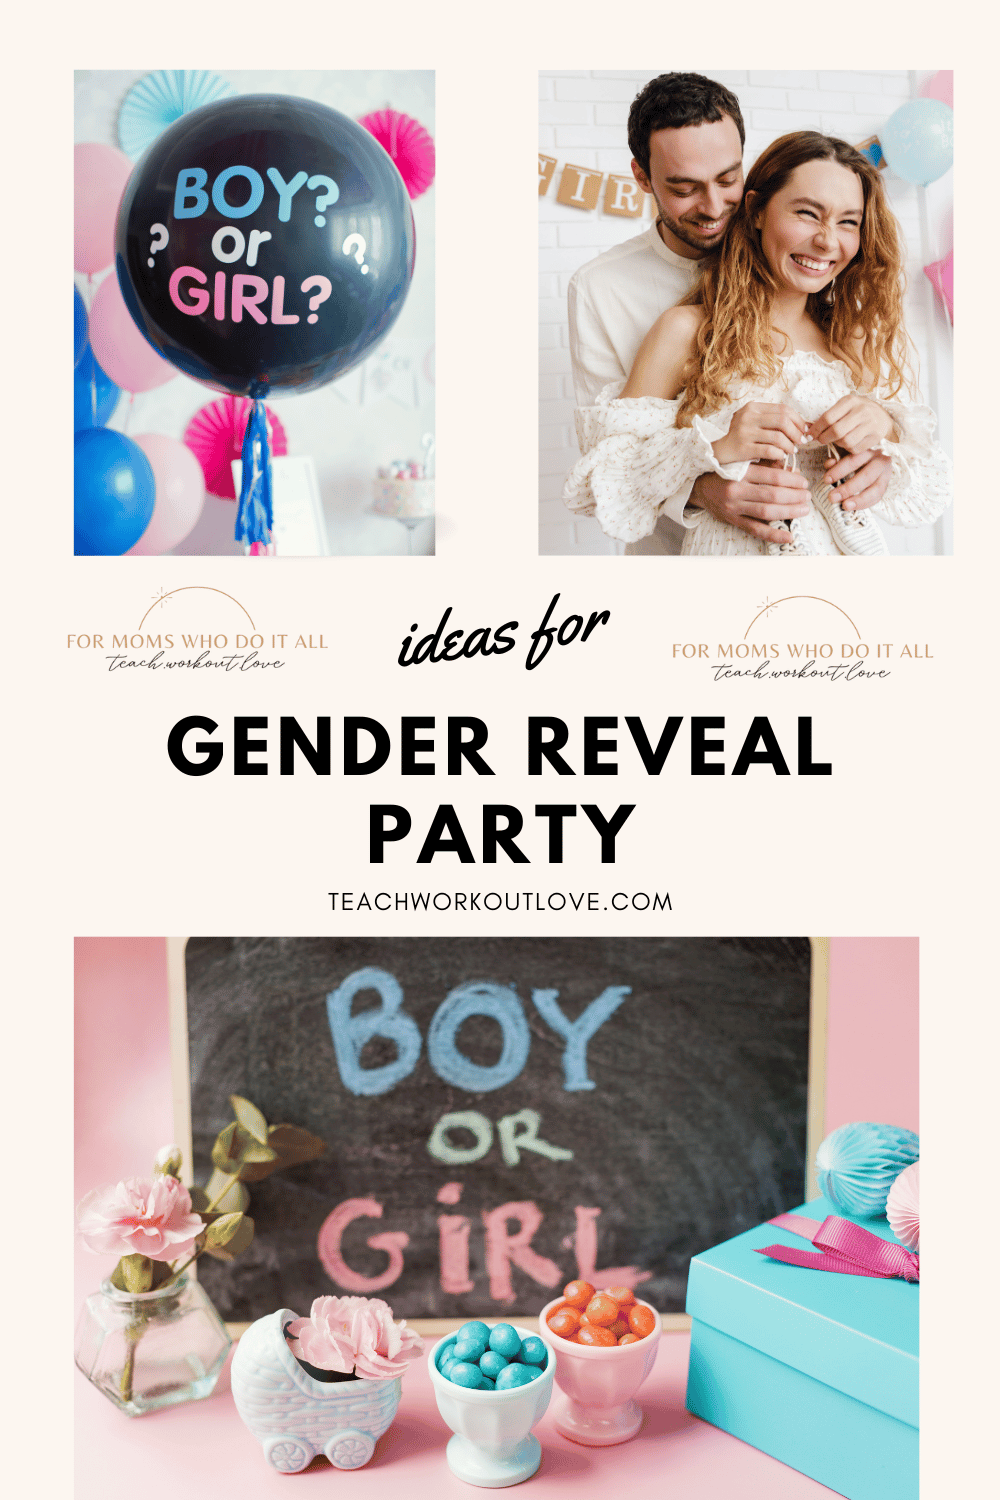 Ideas For A Gender Reveal Party - Teach.Workout.Love